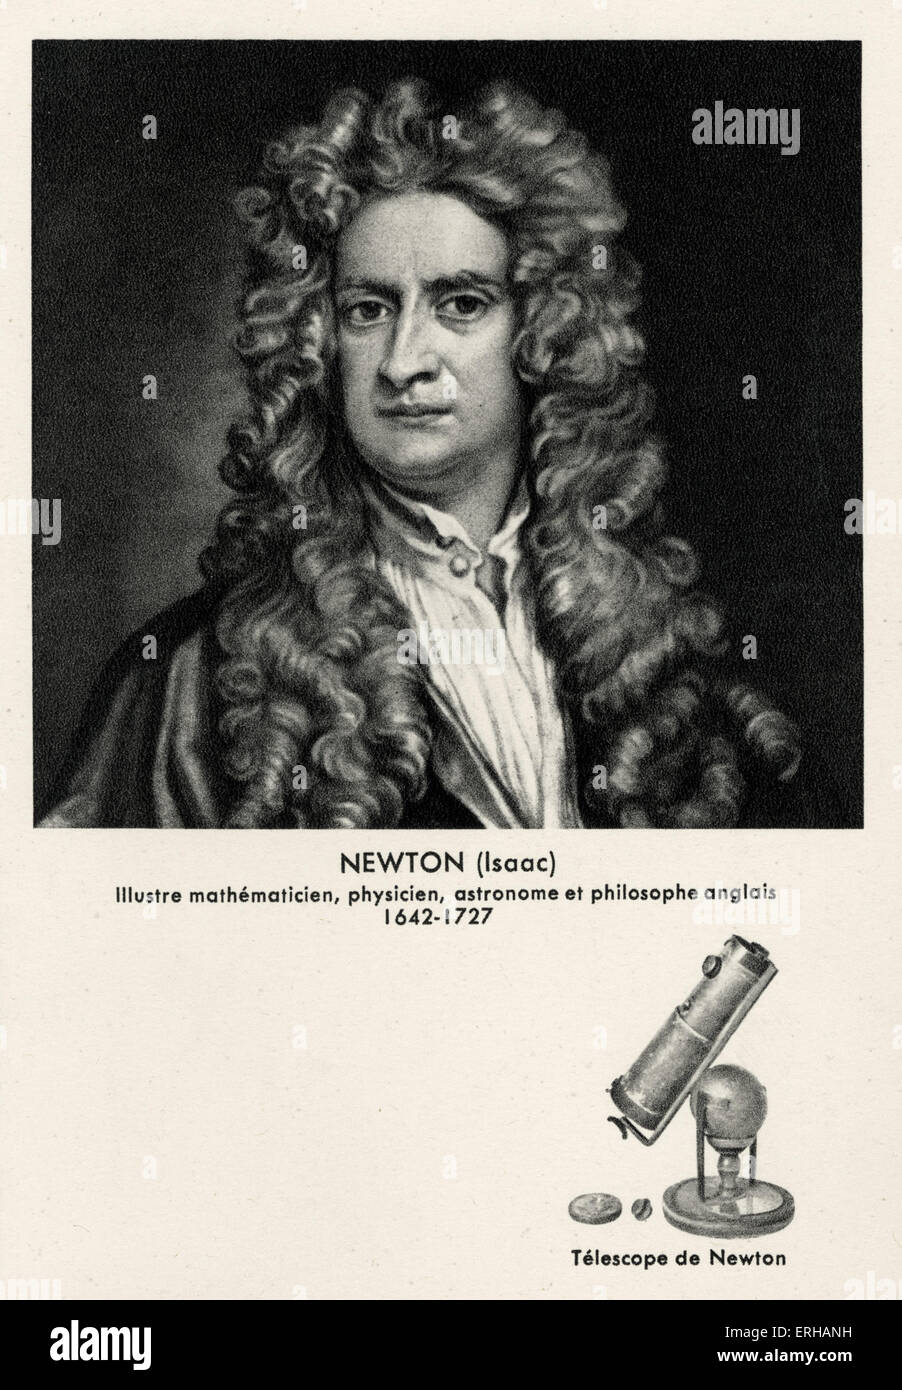 Isaac Newton, portrait. English mathematician, physicist, astronomer and philosopher, 25 December 1642 - 20 March 1727 - Newton Stock Photo